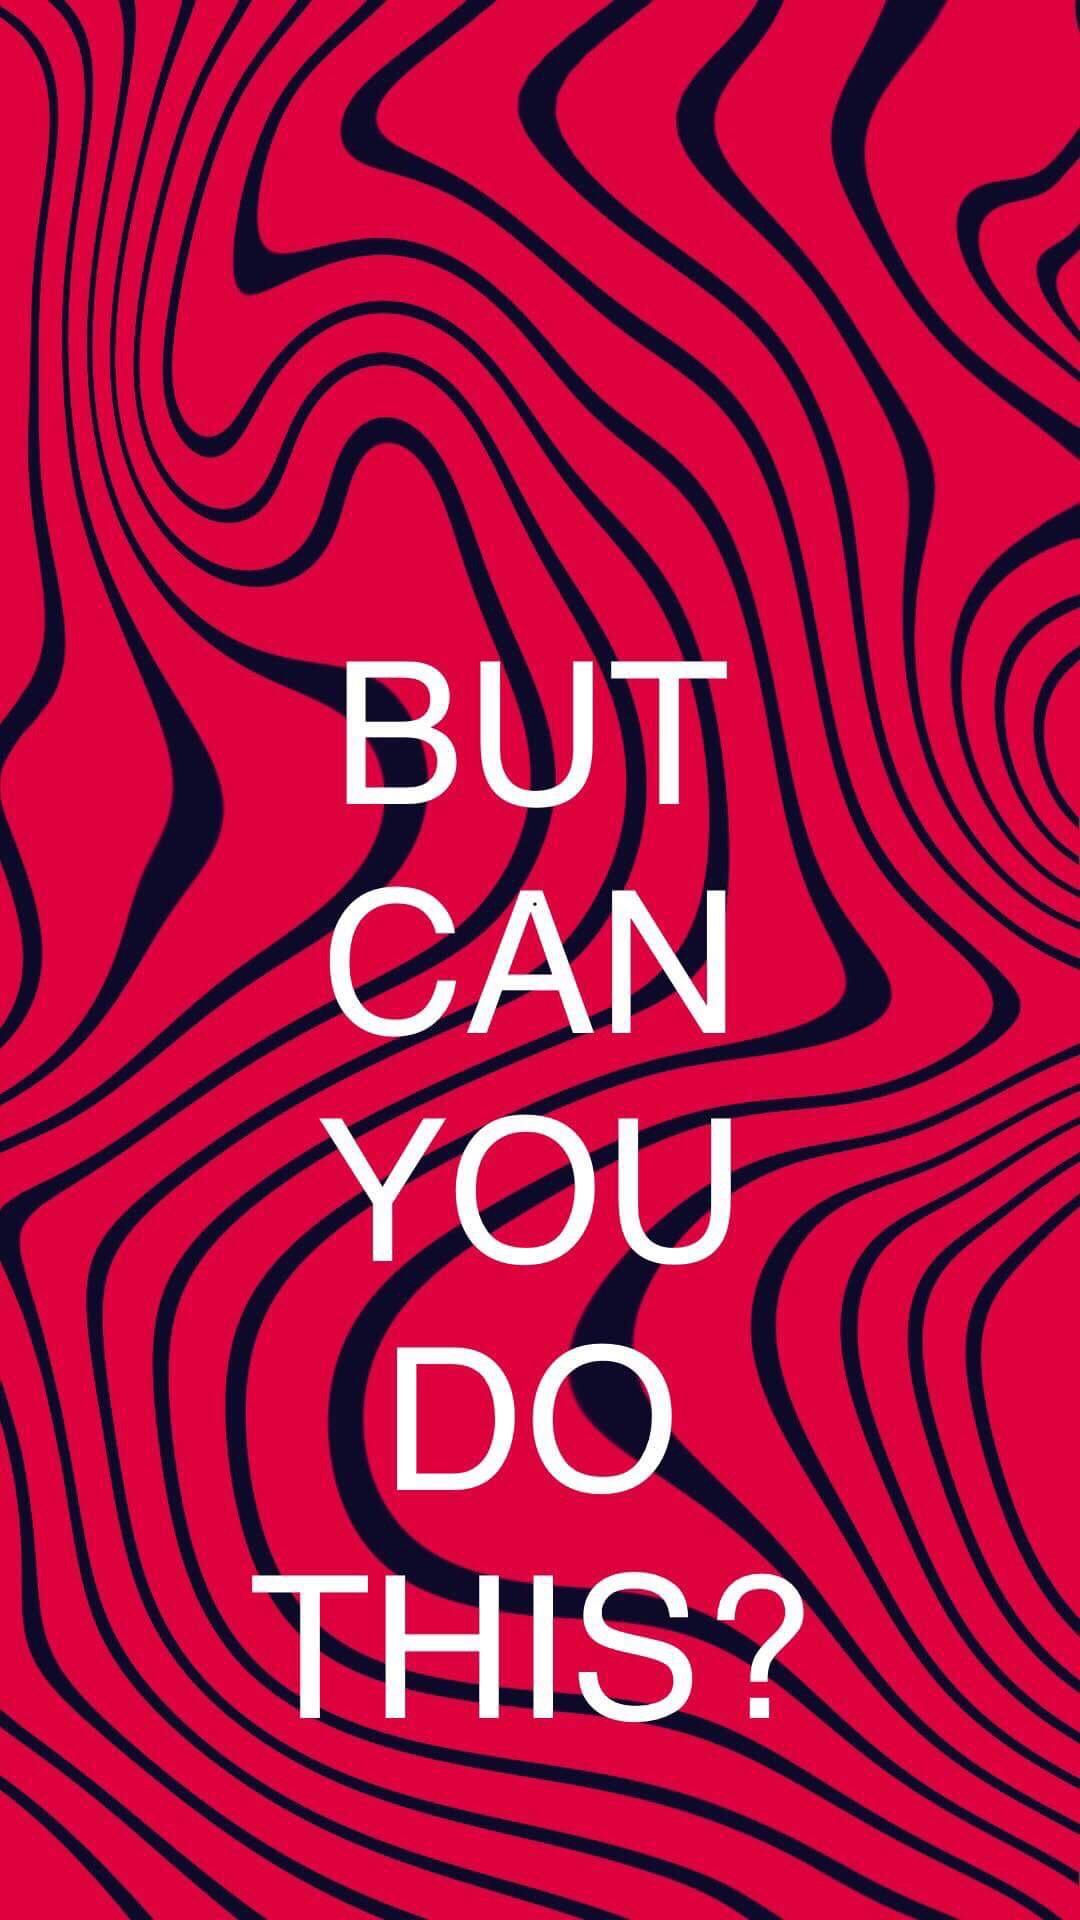 My friend made a pewdiepie themed screen paper